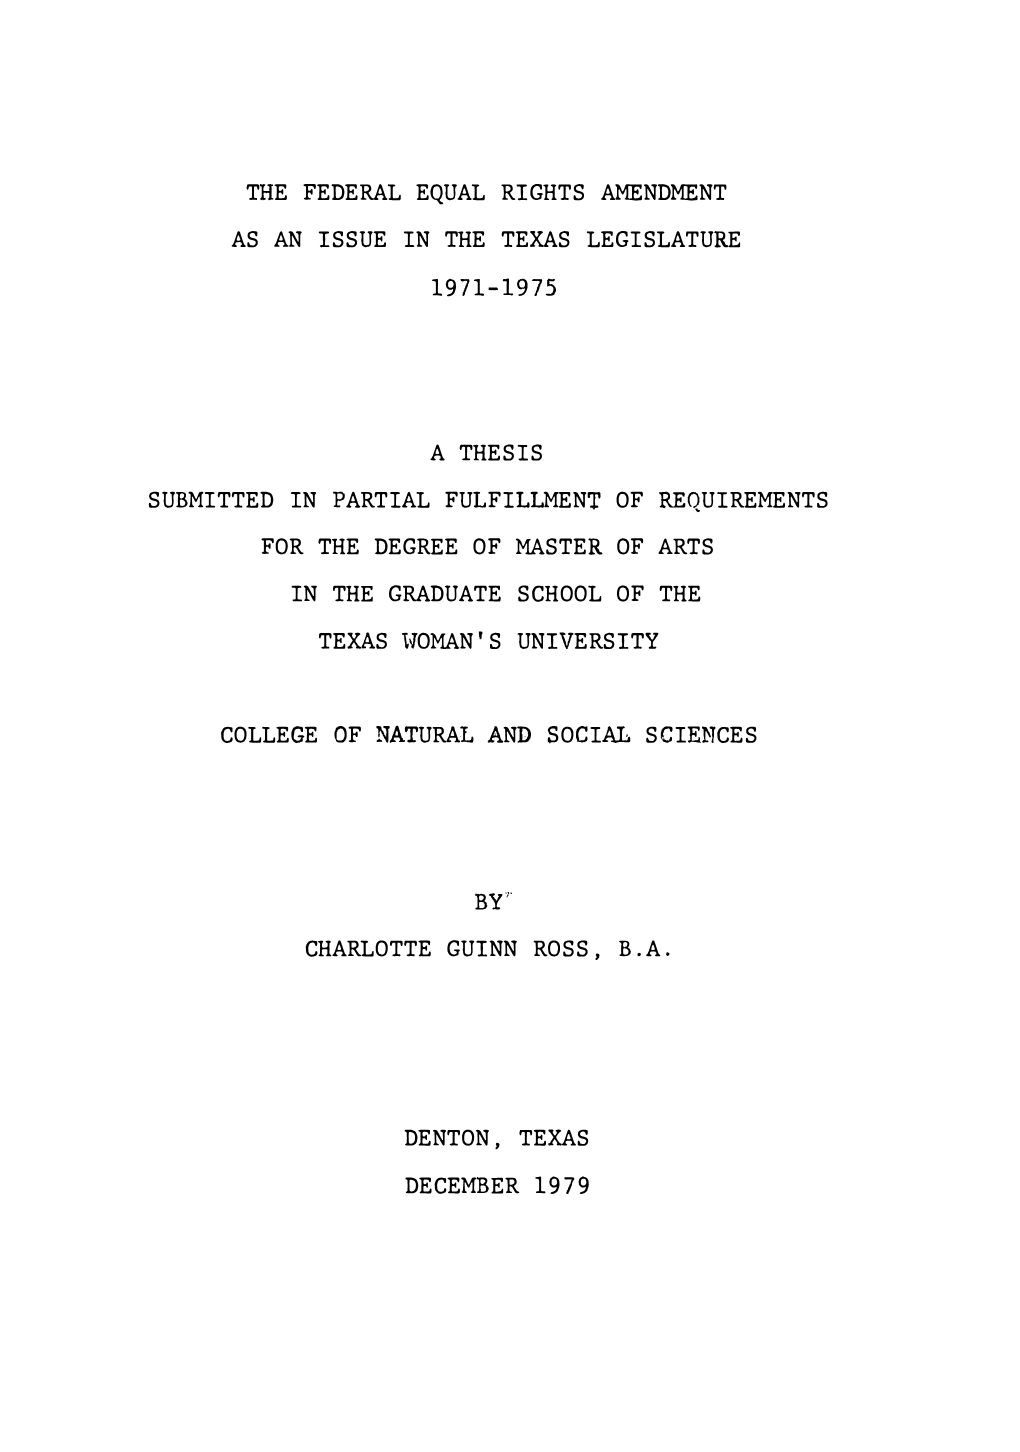 The Federal Equal Rights Amendment As an Issue in the Texas Legislature 1971-1975